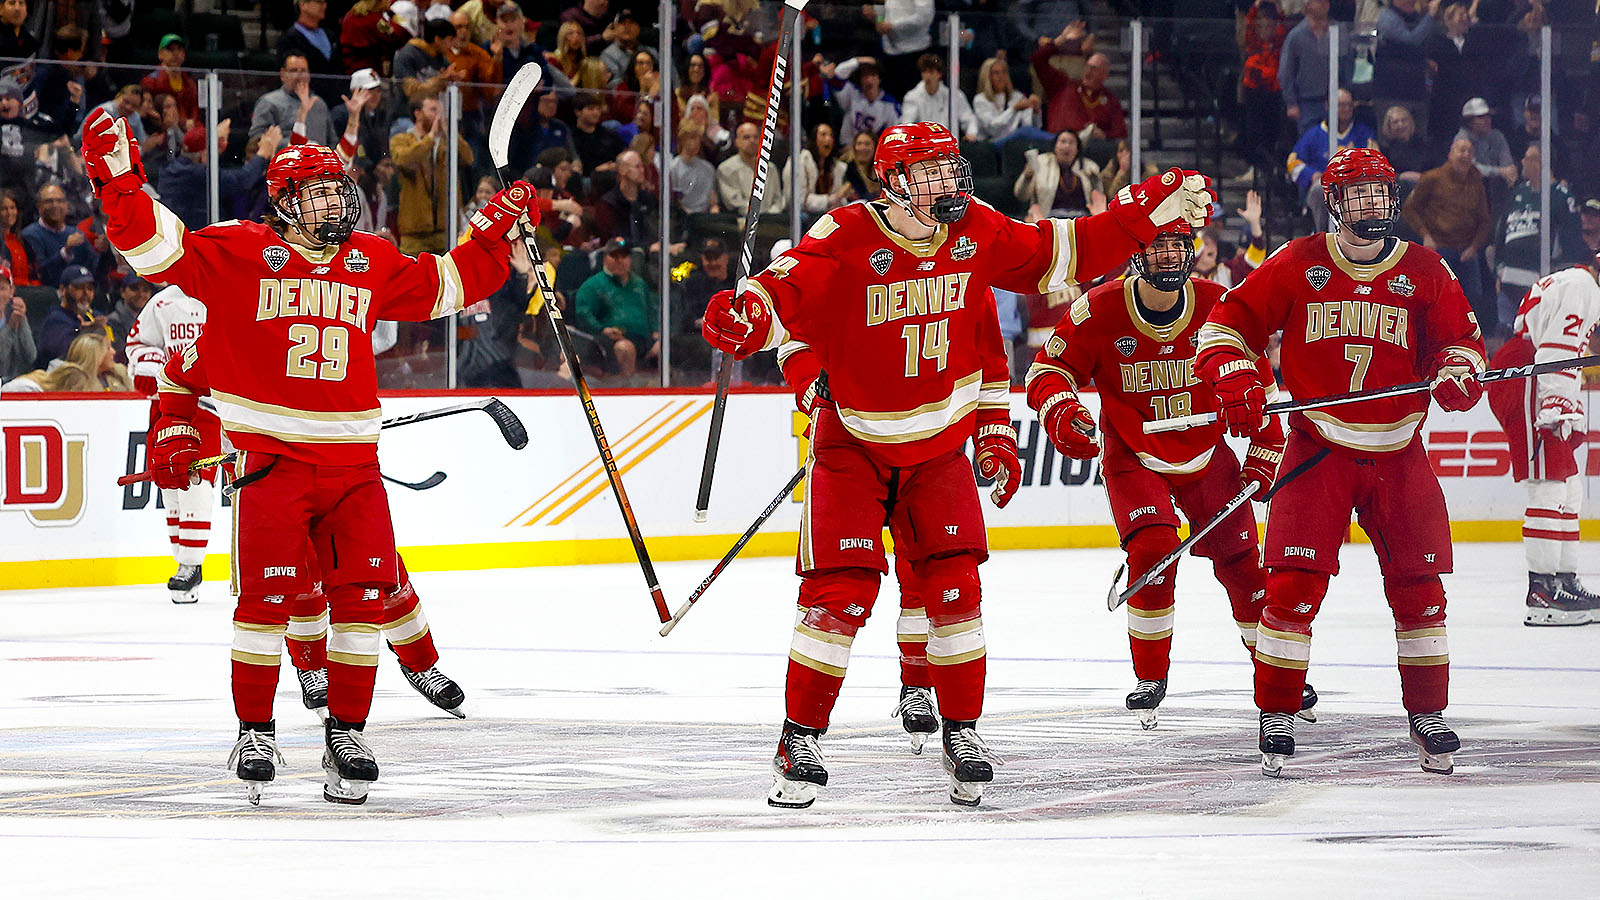 Boston College and Denver Set to Clash in NCAA Ice Hockey National Championship